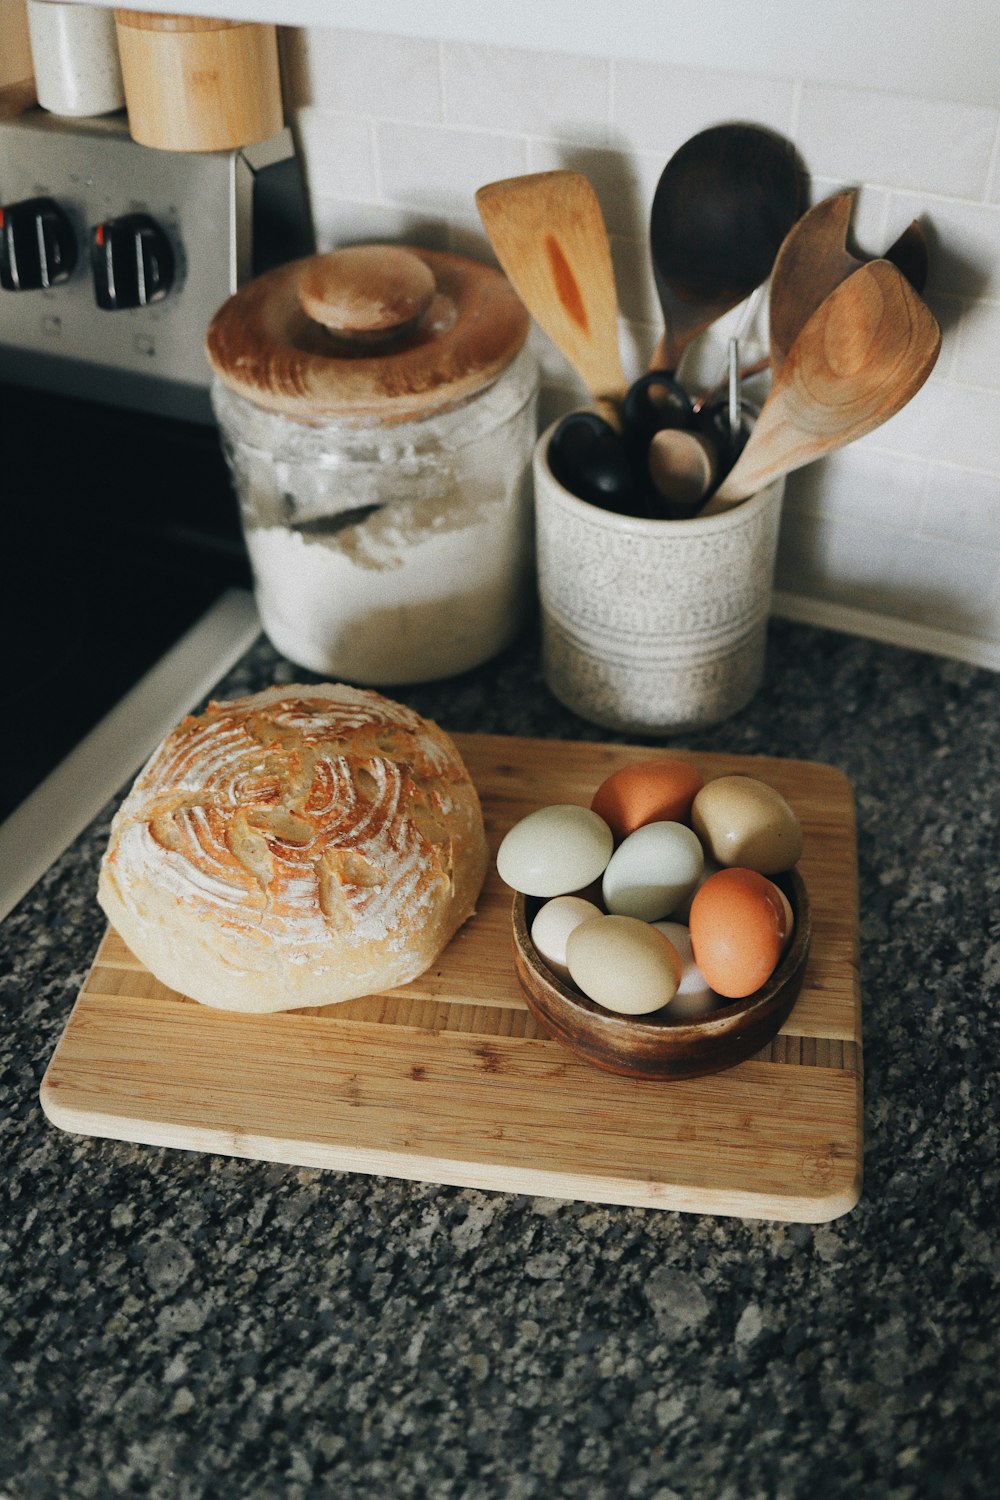 a wooden cutting board topped with a loaf of bread next to eggs